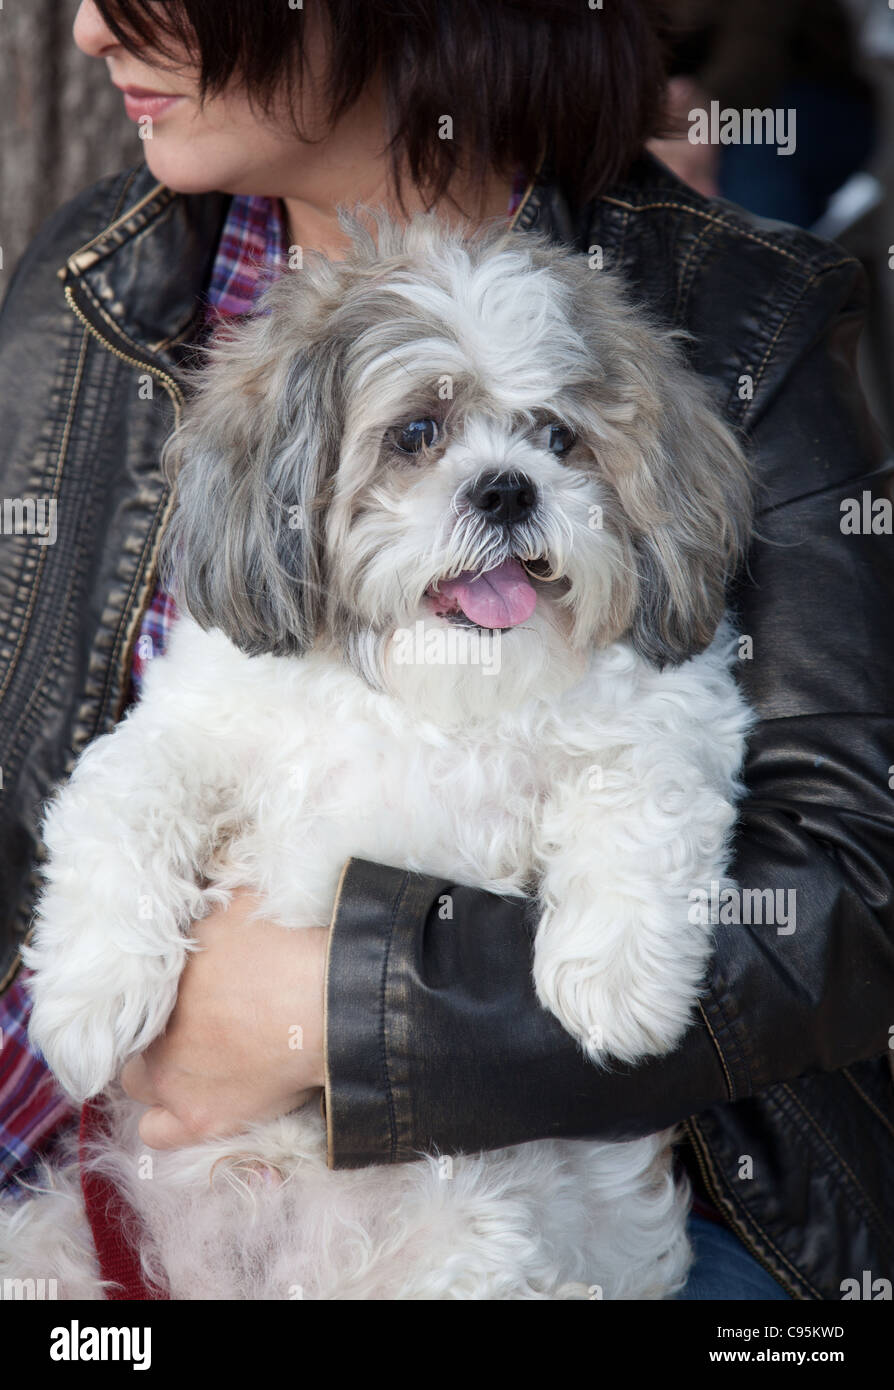 An uncomfortable looking shaggy dog being carried by it's owner Stock Photo